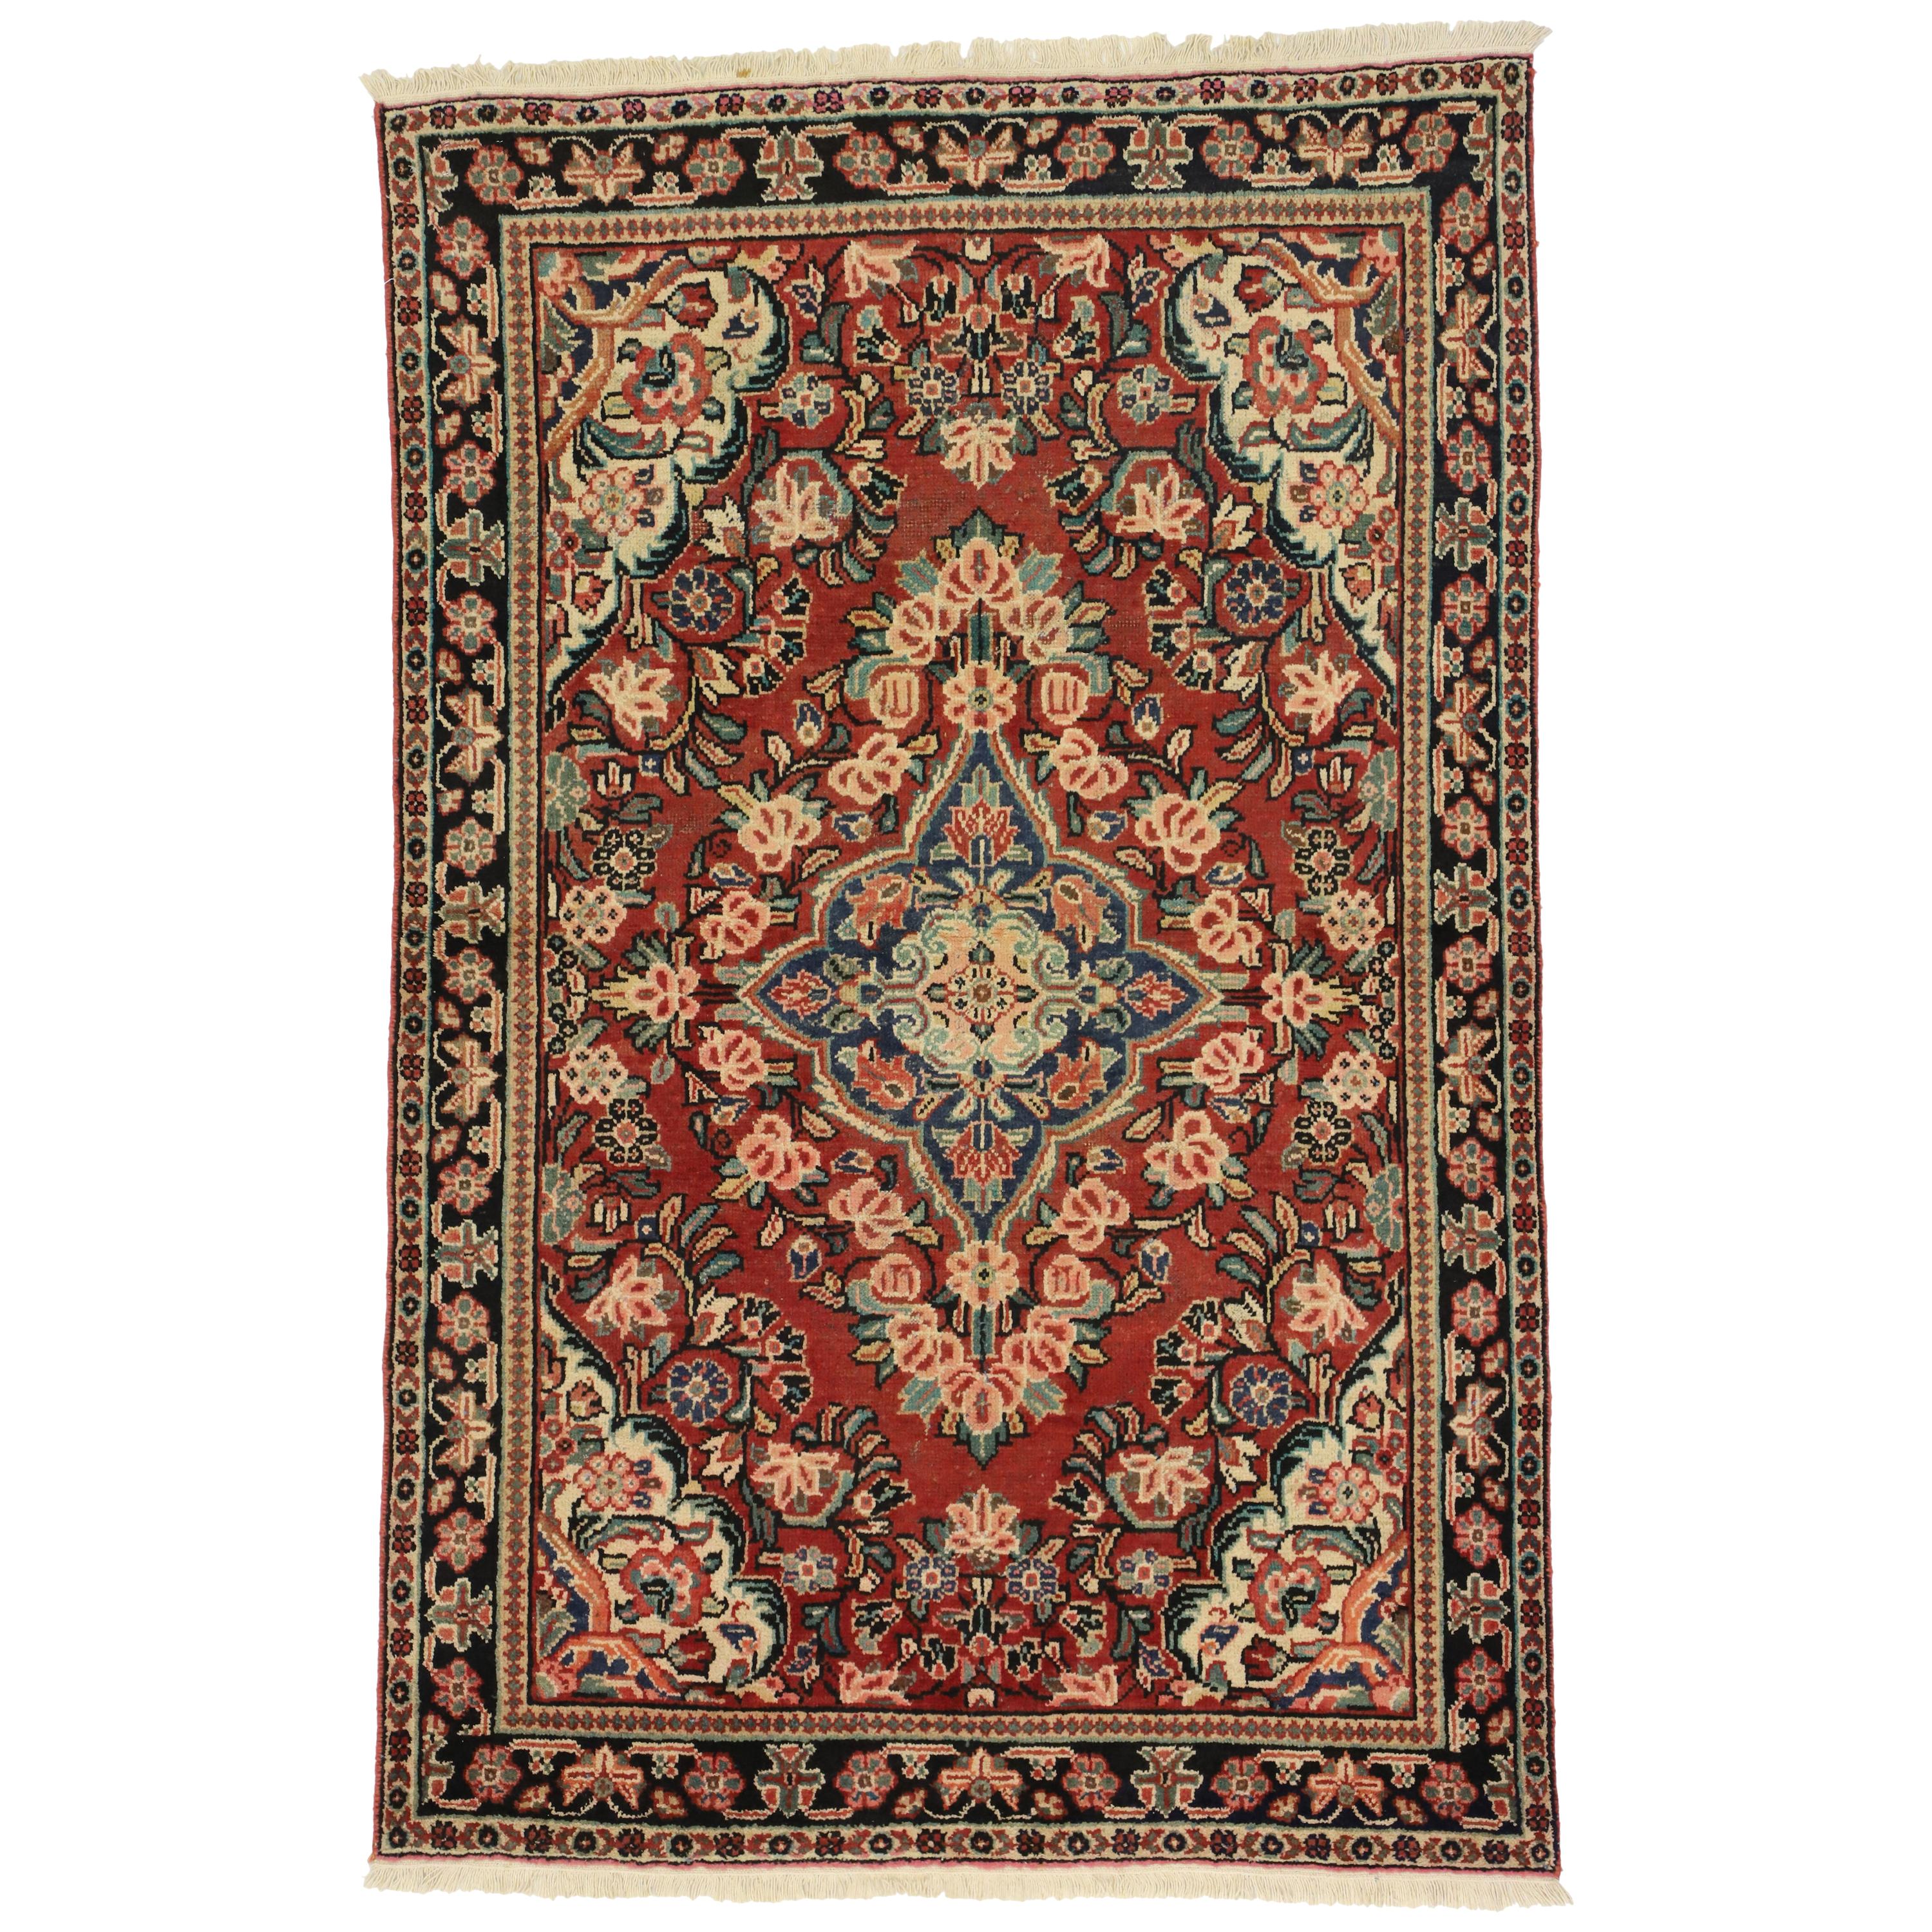 Vintage Persian Mahal Sarouk Rug with Rustic English Country Style, Entry Rug